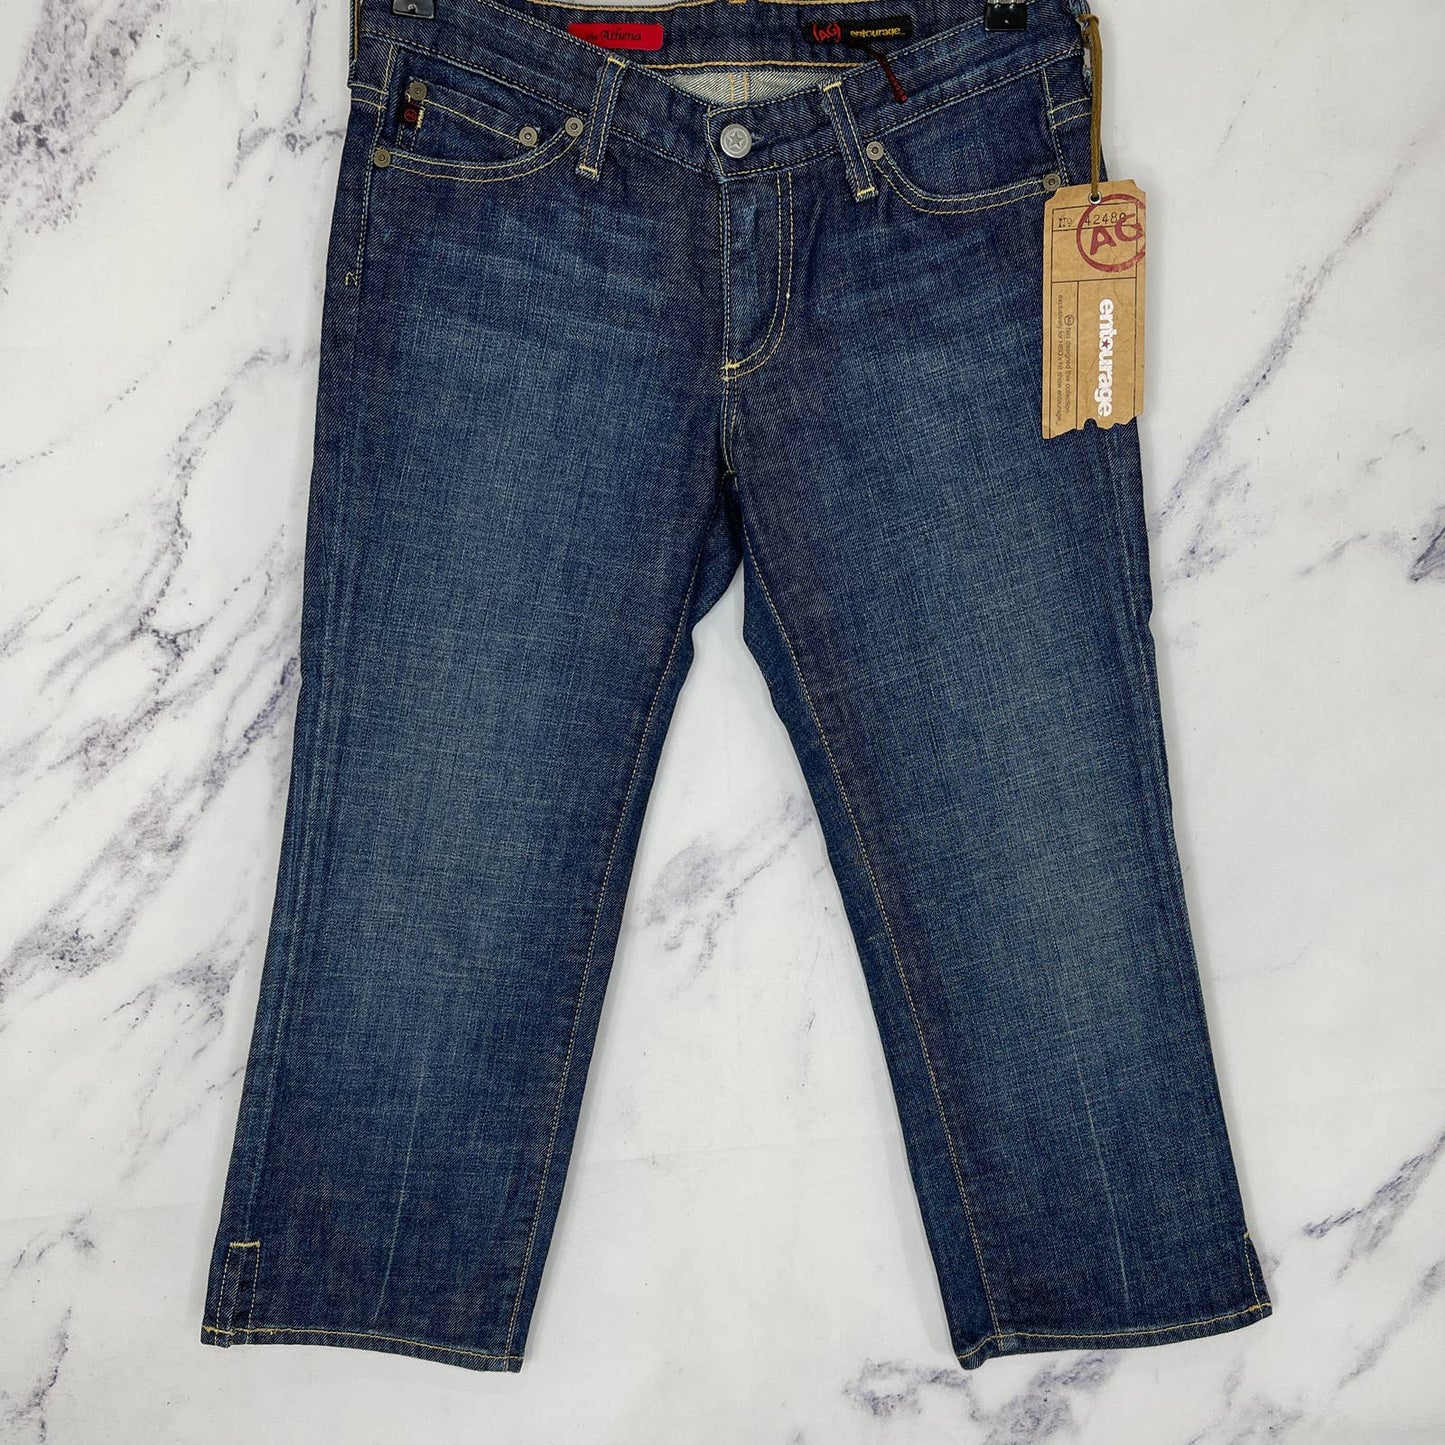 AG Adriano Goldschmied | the Athena Crop Jeans